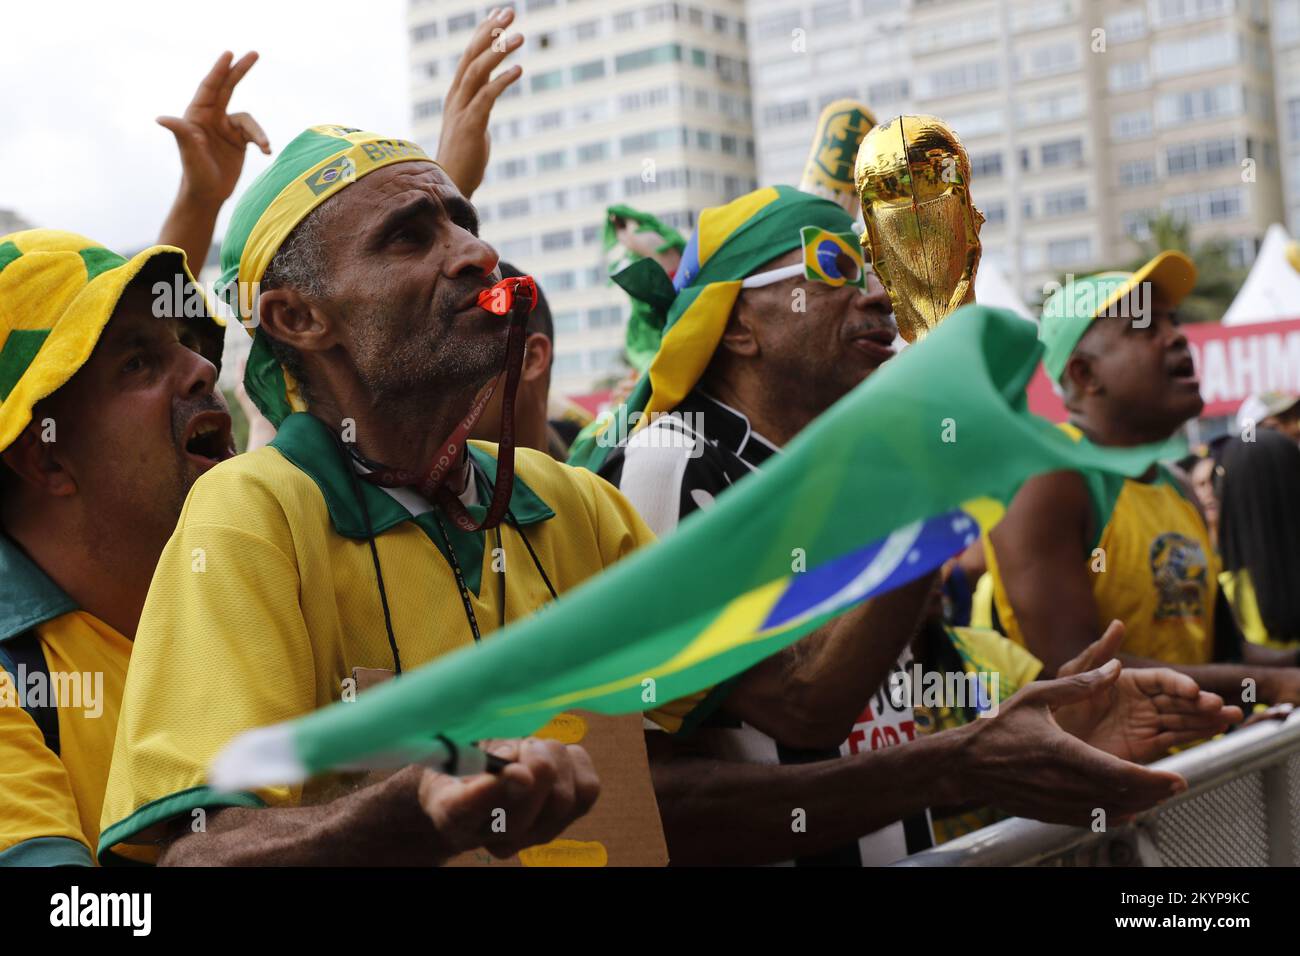 Brazilian fans supporting national soccer team playing Fifa World Cup at Fan Festival arena Stock Photo